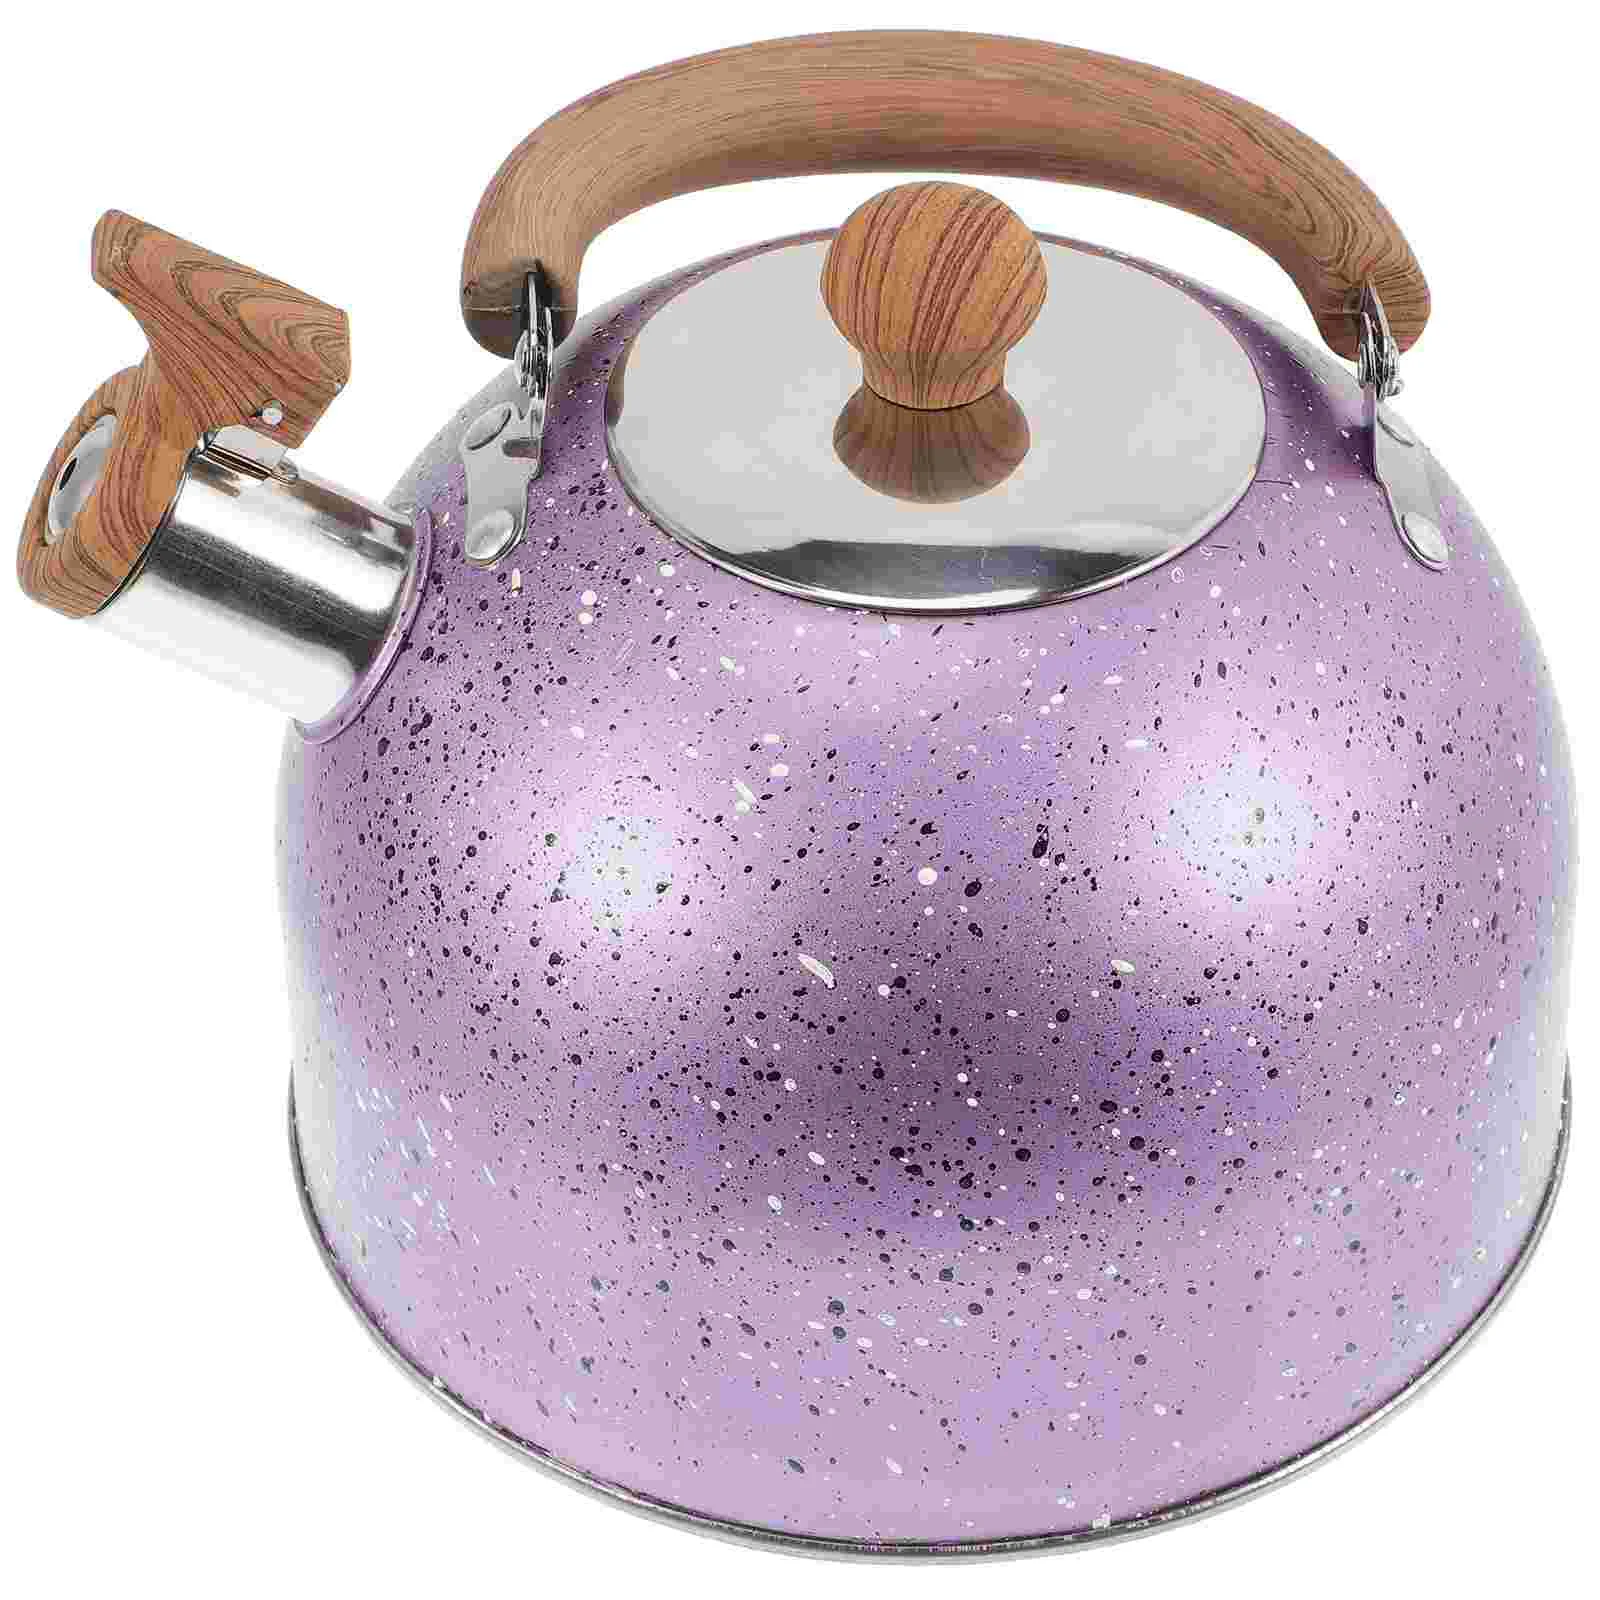 

Stainless Steel Water Jug Kettle Metal Pot Household Boiling Convenient Practical Whistling Make Tea